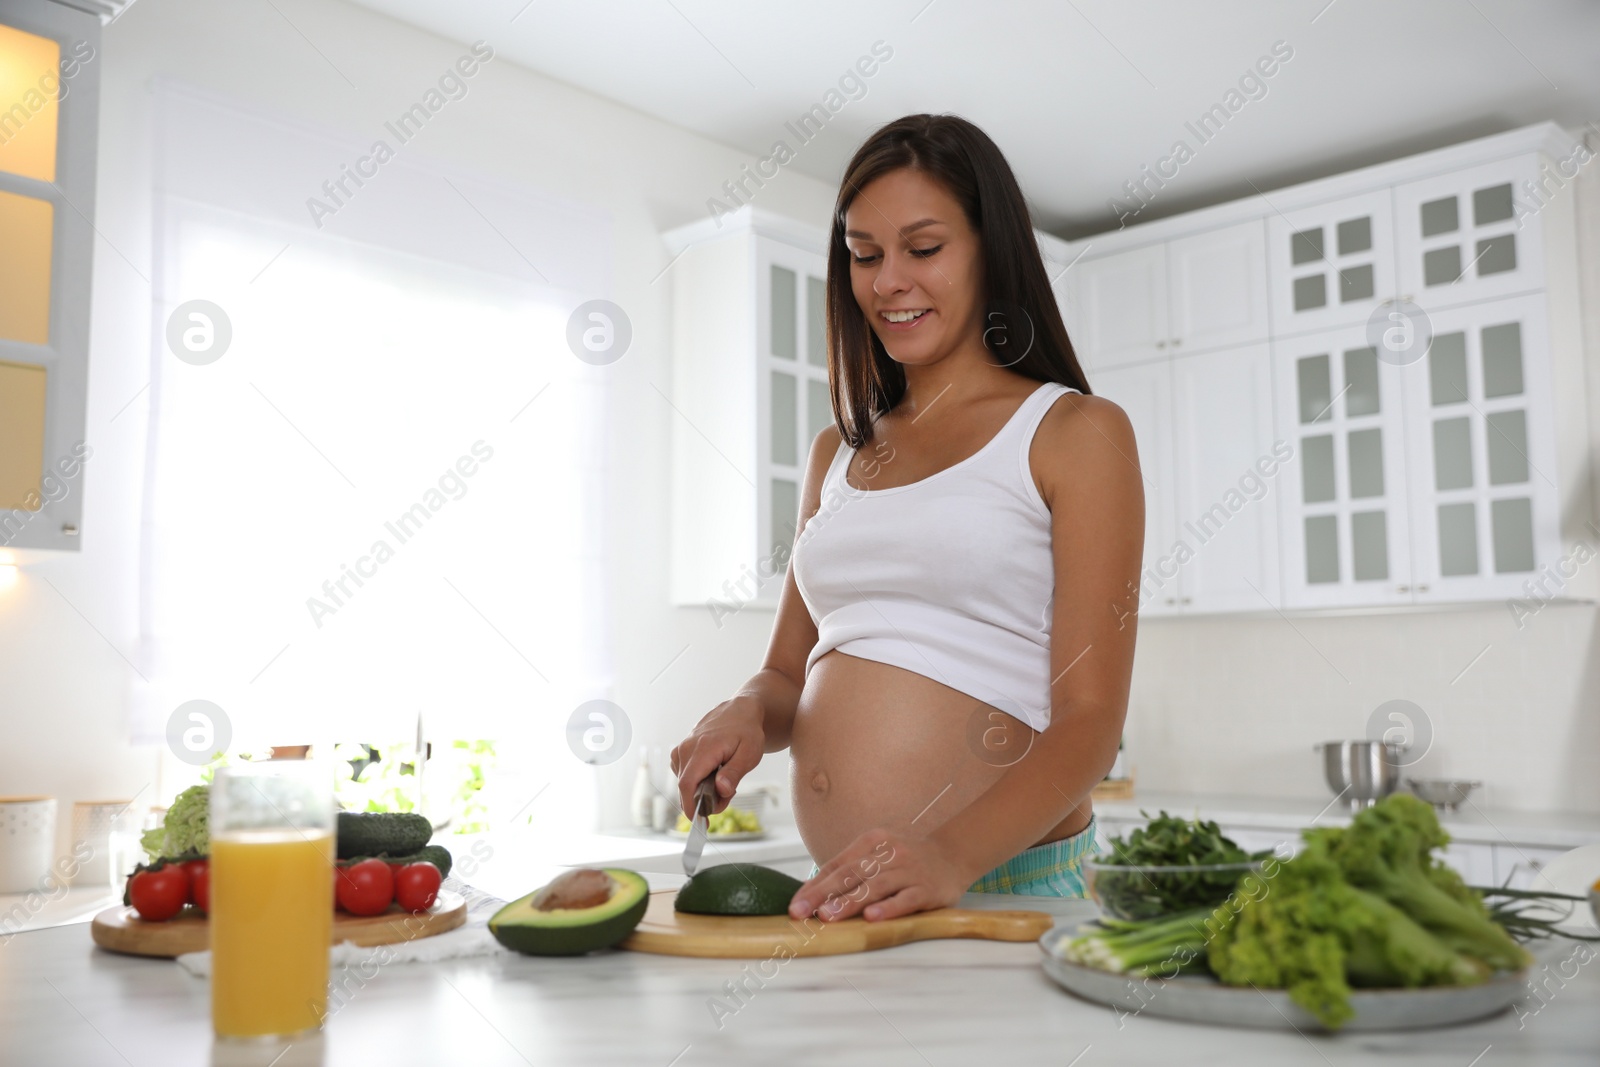 Photo of Young pregnant woman cutting avocado at table in kitchen. Taking care of baby health